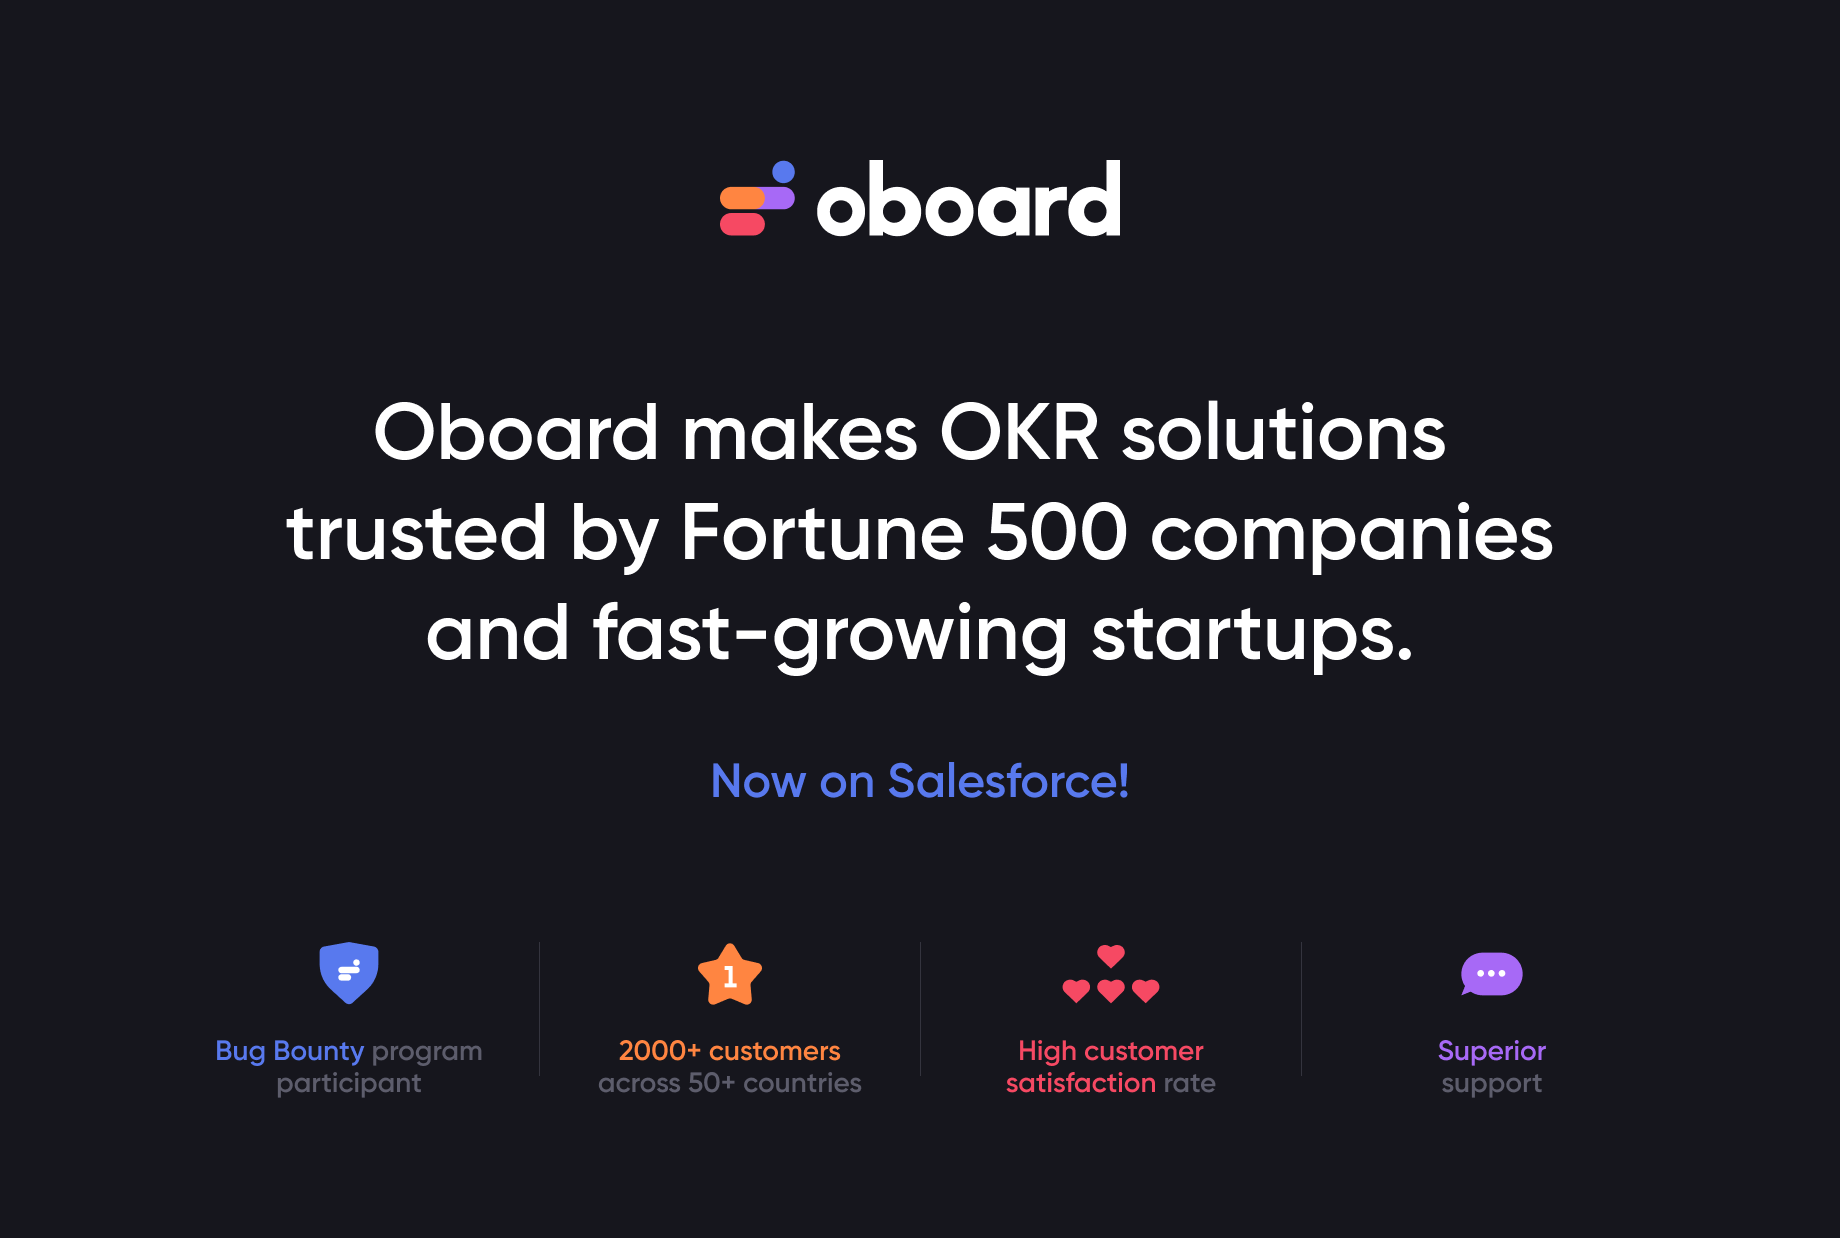 Oboard makes OKR solutions trusted by Fortune 500 companies and fast-growing startups.